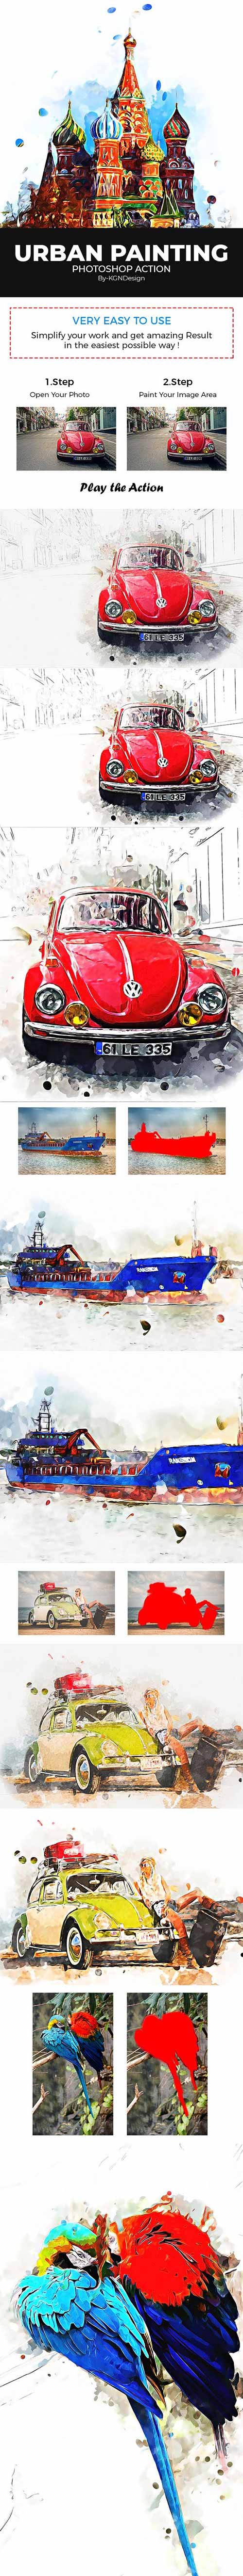 GraphicRiver - Urban Painting Photoshop Action - 22230566